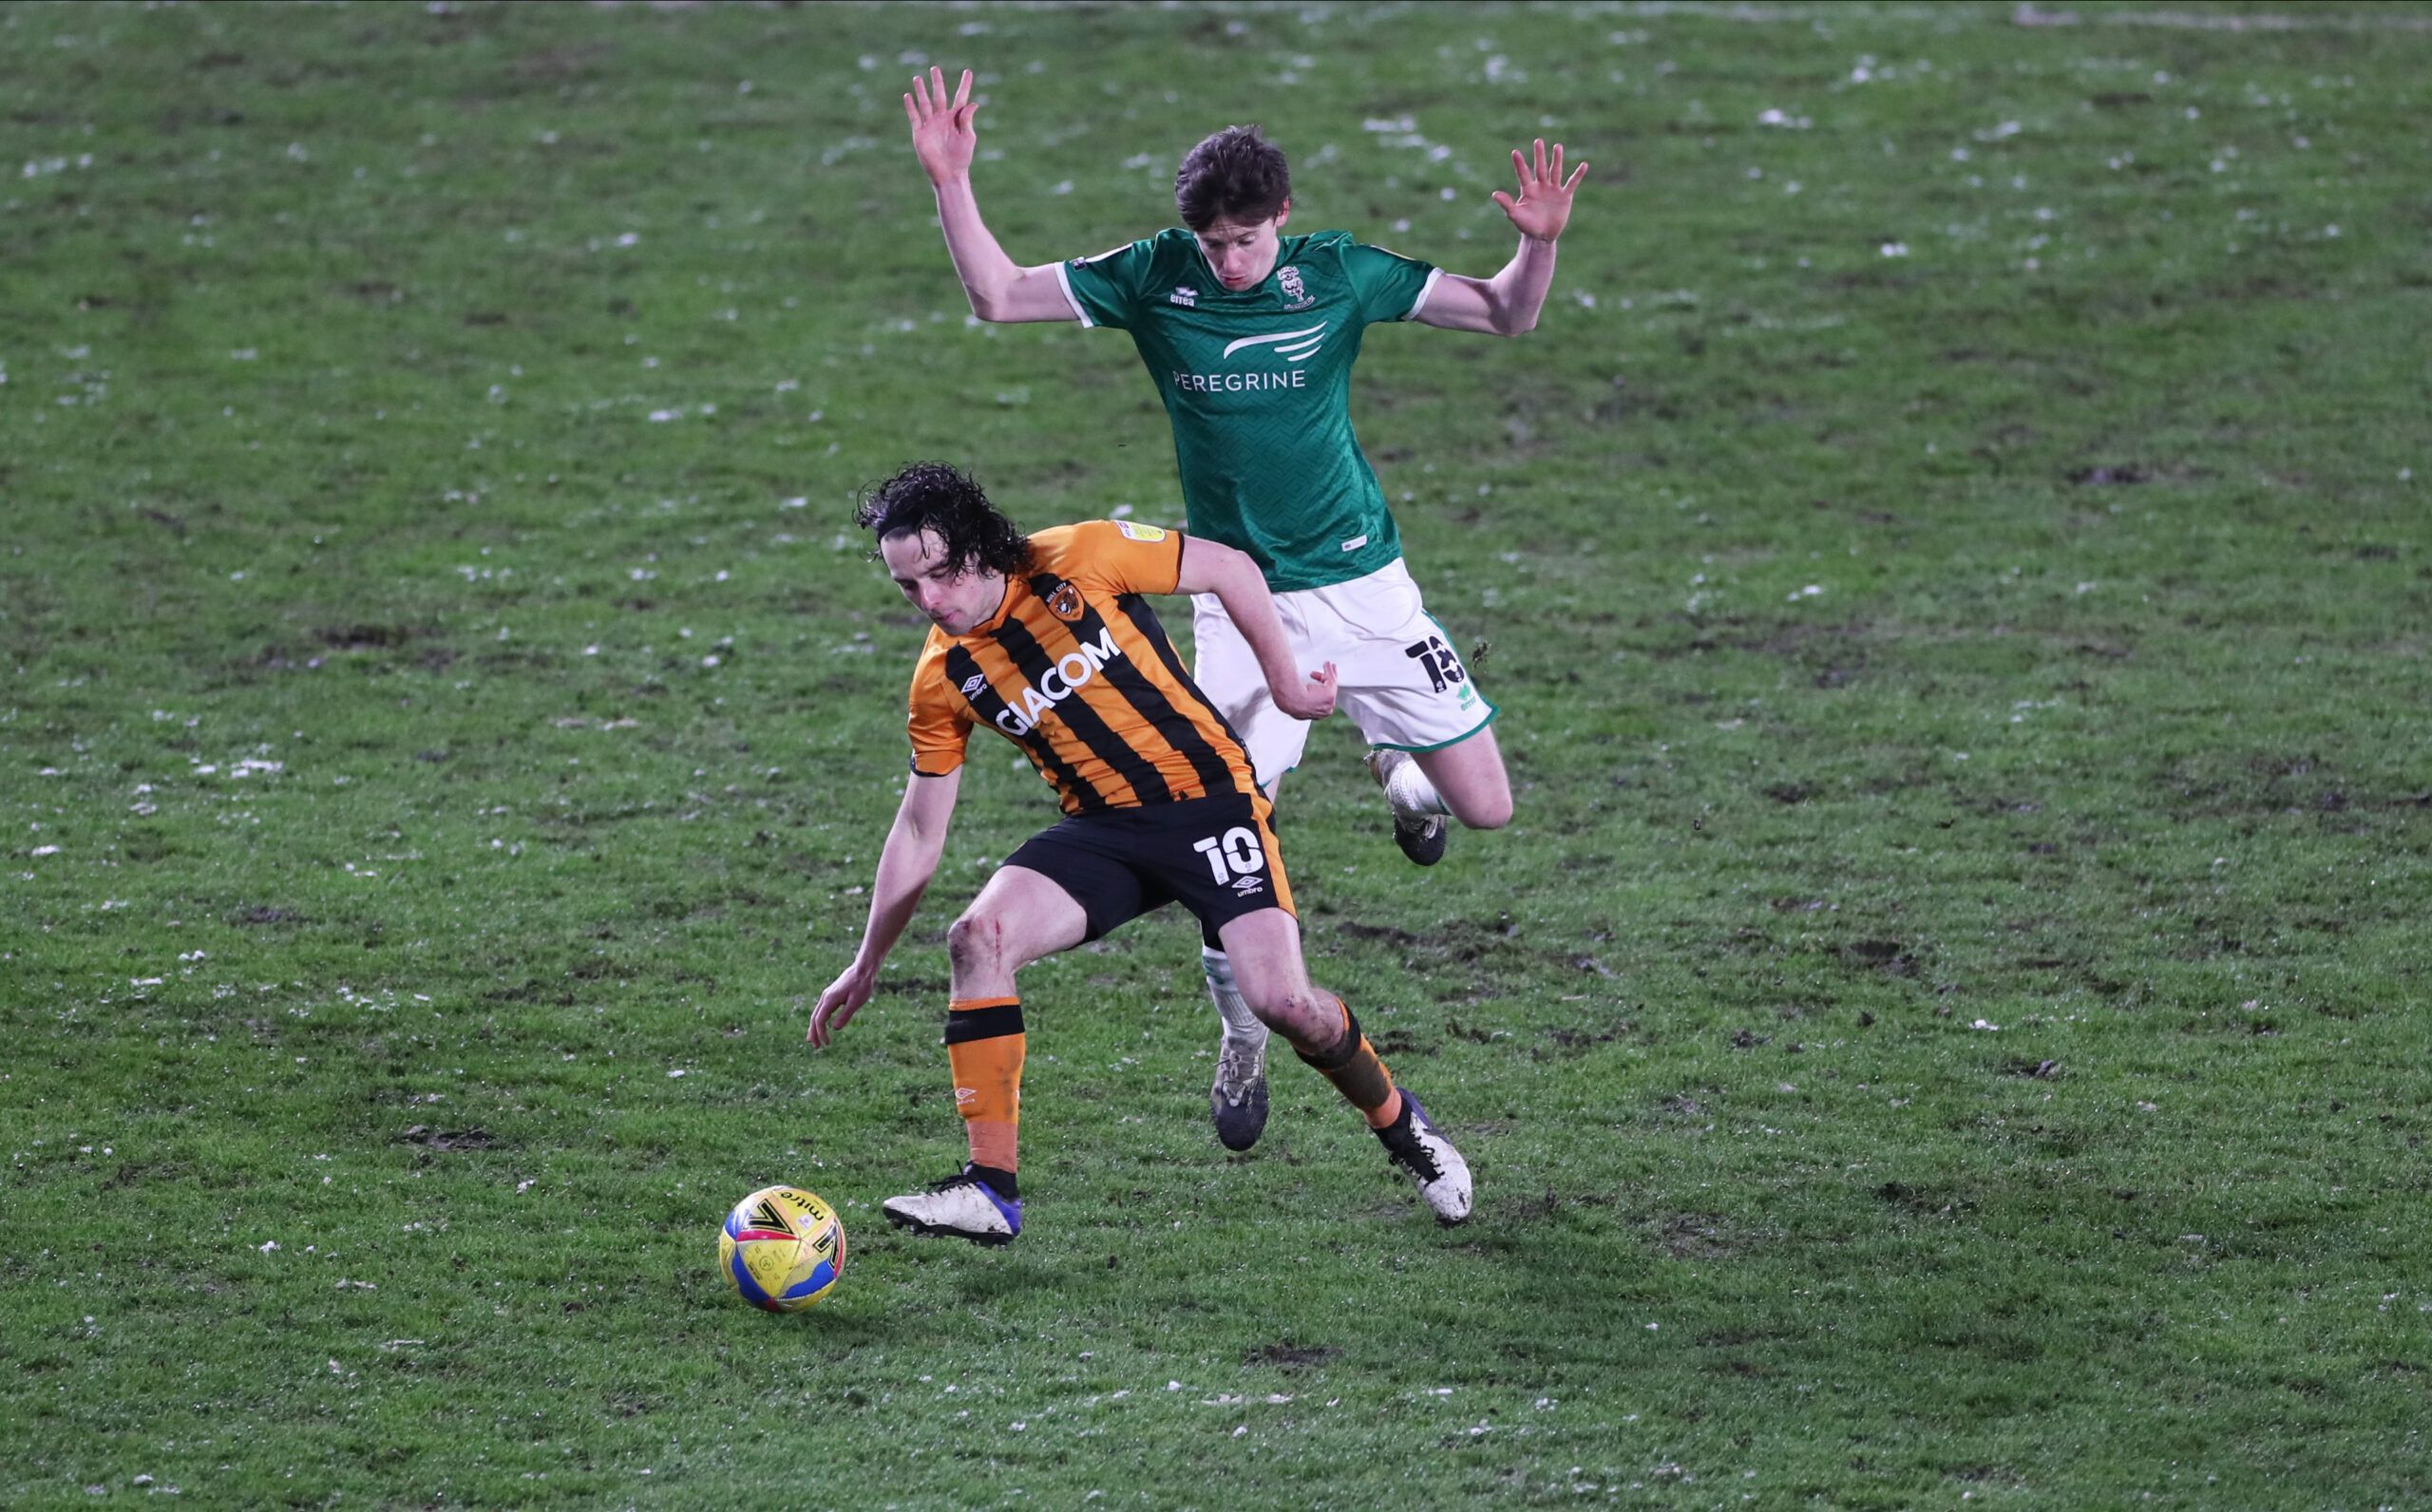 Soccer Football - League One - Hull City v Lincoln City - KCOM Stadium, Hull, Britain - February 9, 2021 Hull City's George Honeyman in action with Lincoln City's Conor McGrandles Action Images/Lee Smith EDITORIAL USE ONLY. No use with unauthorized audio, video, data, fixture lists, club/league logos or 'live' services. Online in-match use limited to 75 images, no video emulation. No use in betting, games or single club /league/player publications.  Please contact your account representative for